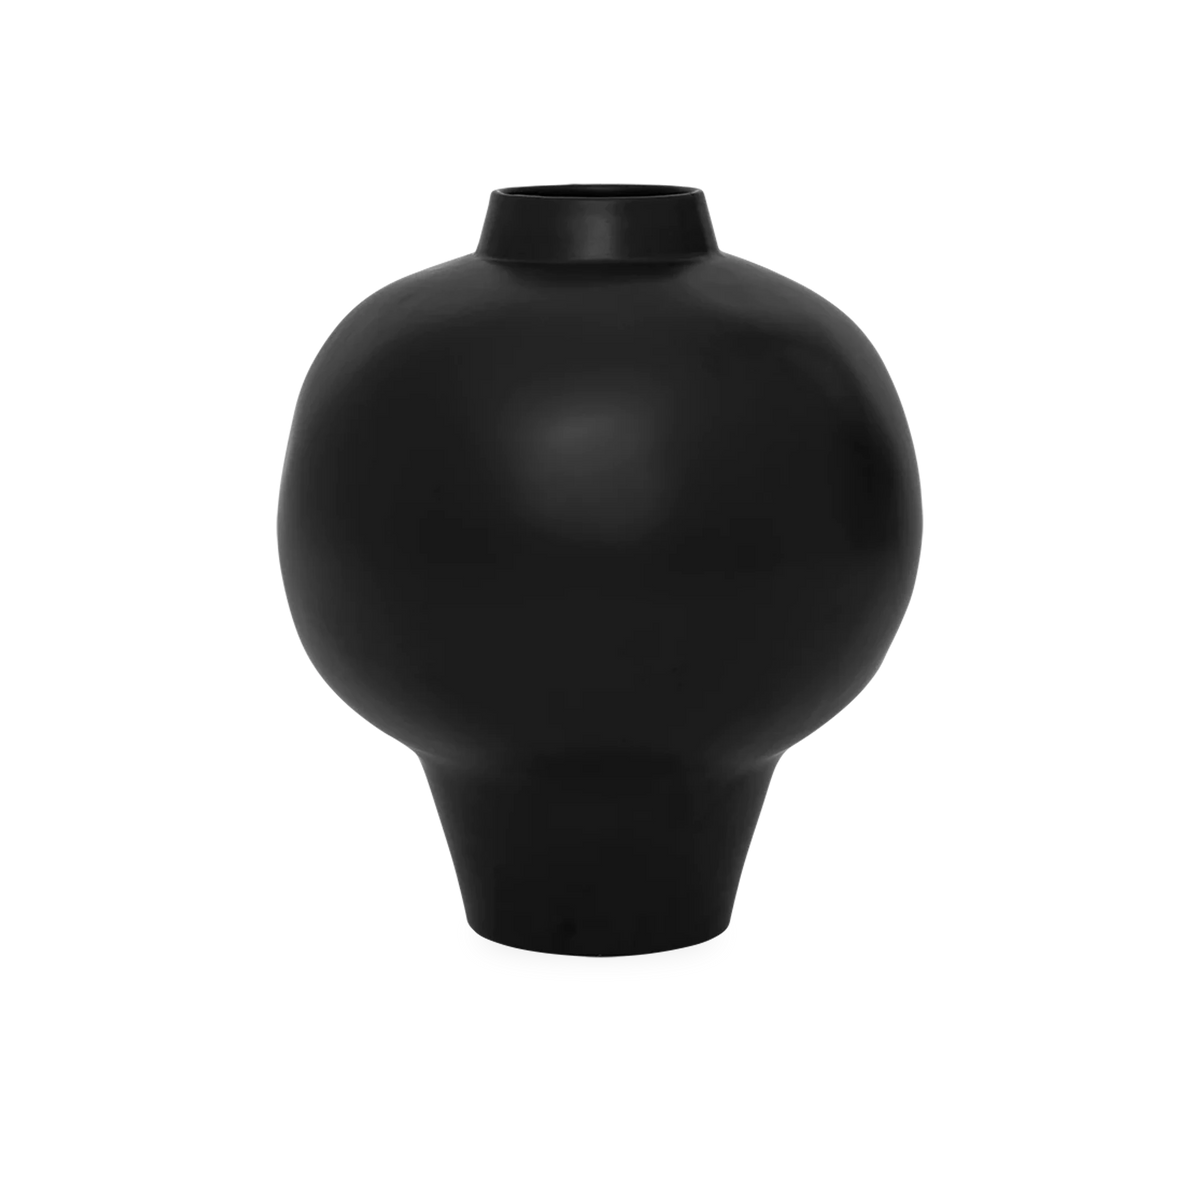 Accenting natural beauty, the Bulky Ceramic Vase features a handmade round body that is complemented with a short neck and a tapered base.